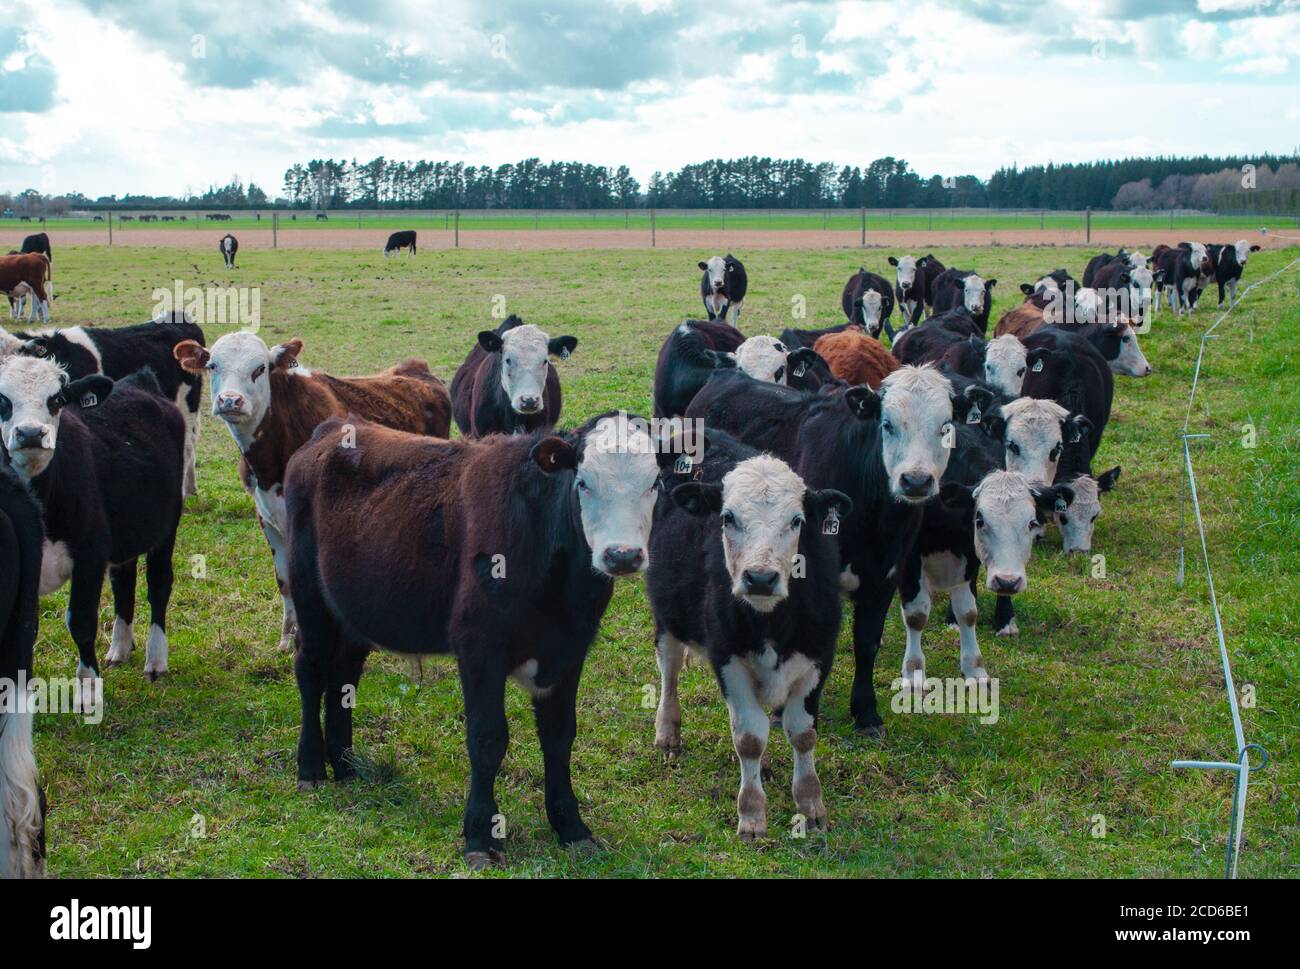 New Zealand Countryside: iconic kiwi sights: herds of cattle and strip-feeding. Stock Photo